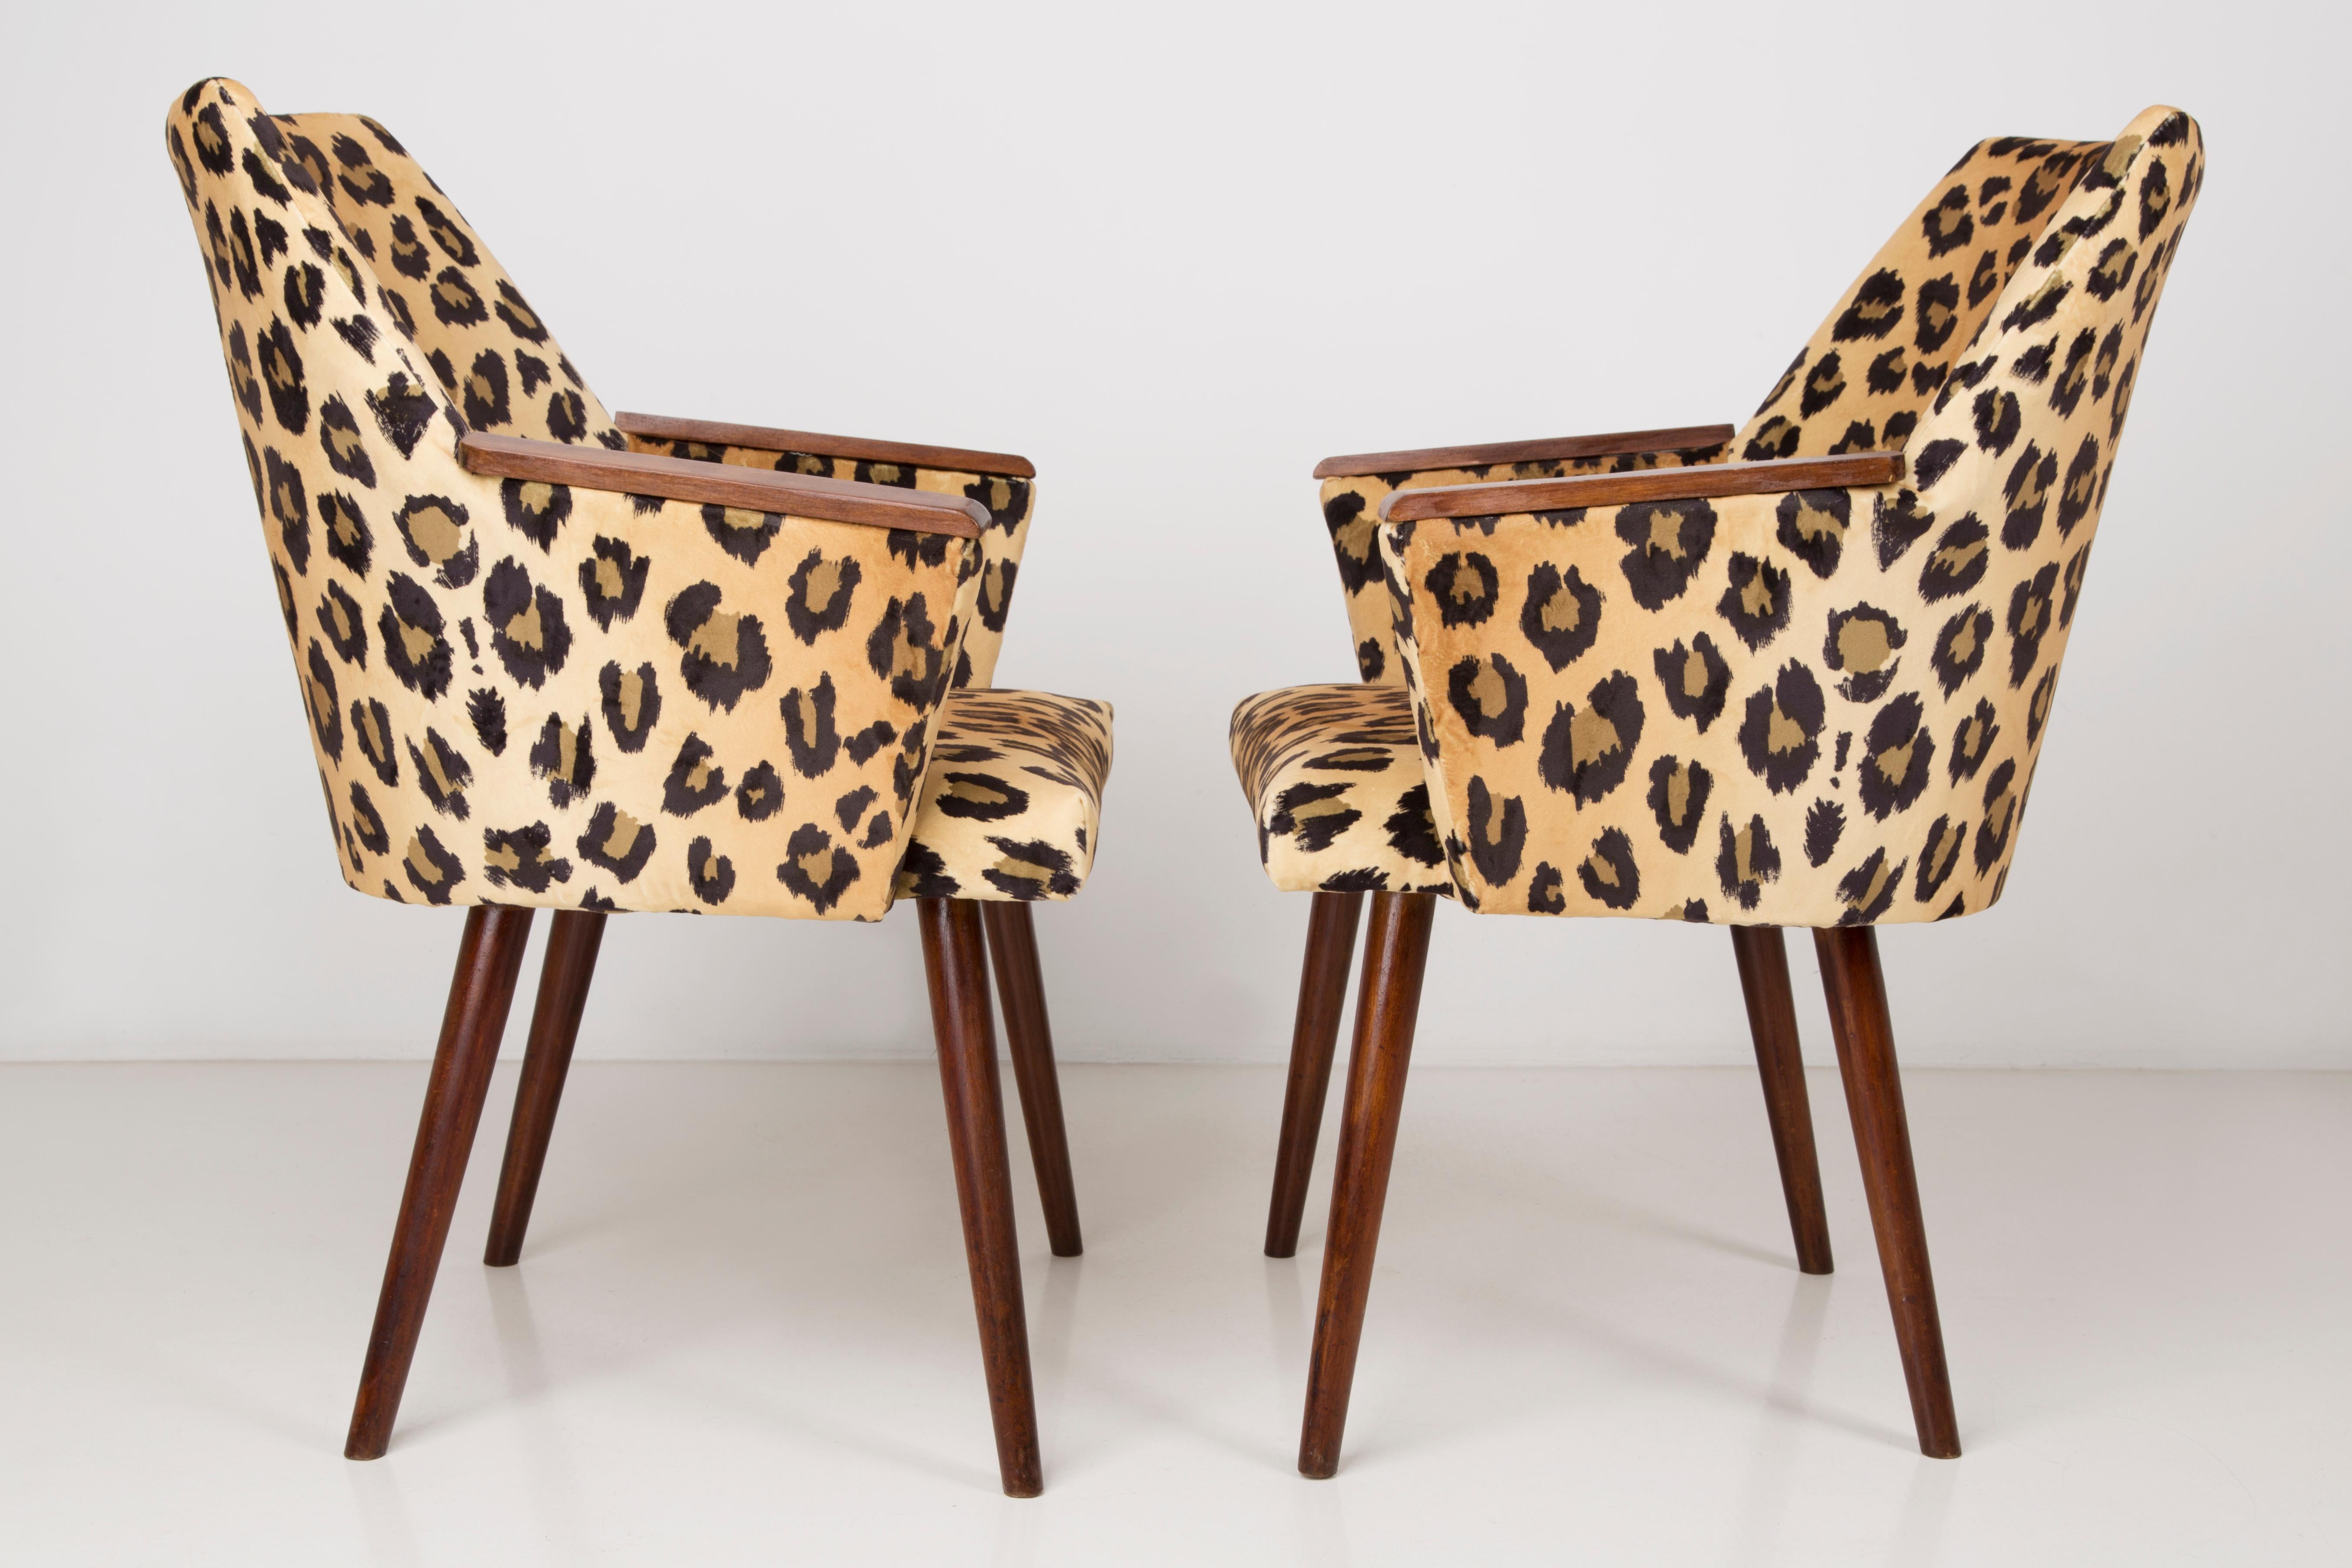 Set of Two Mid-Century Modern Leopard Print Chairs, 1960s, Germany 3